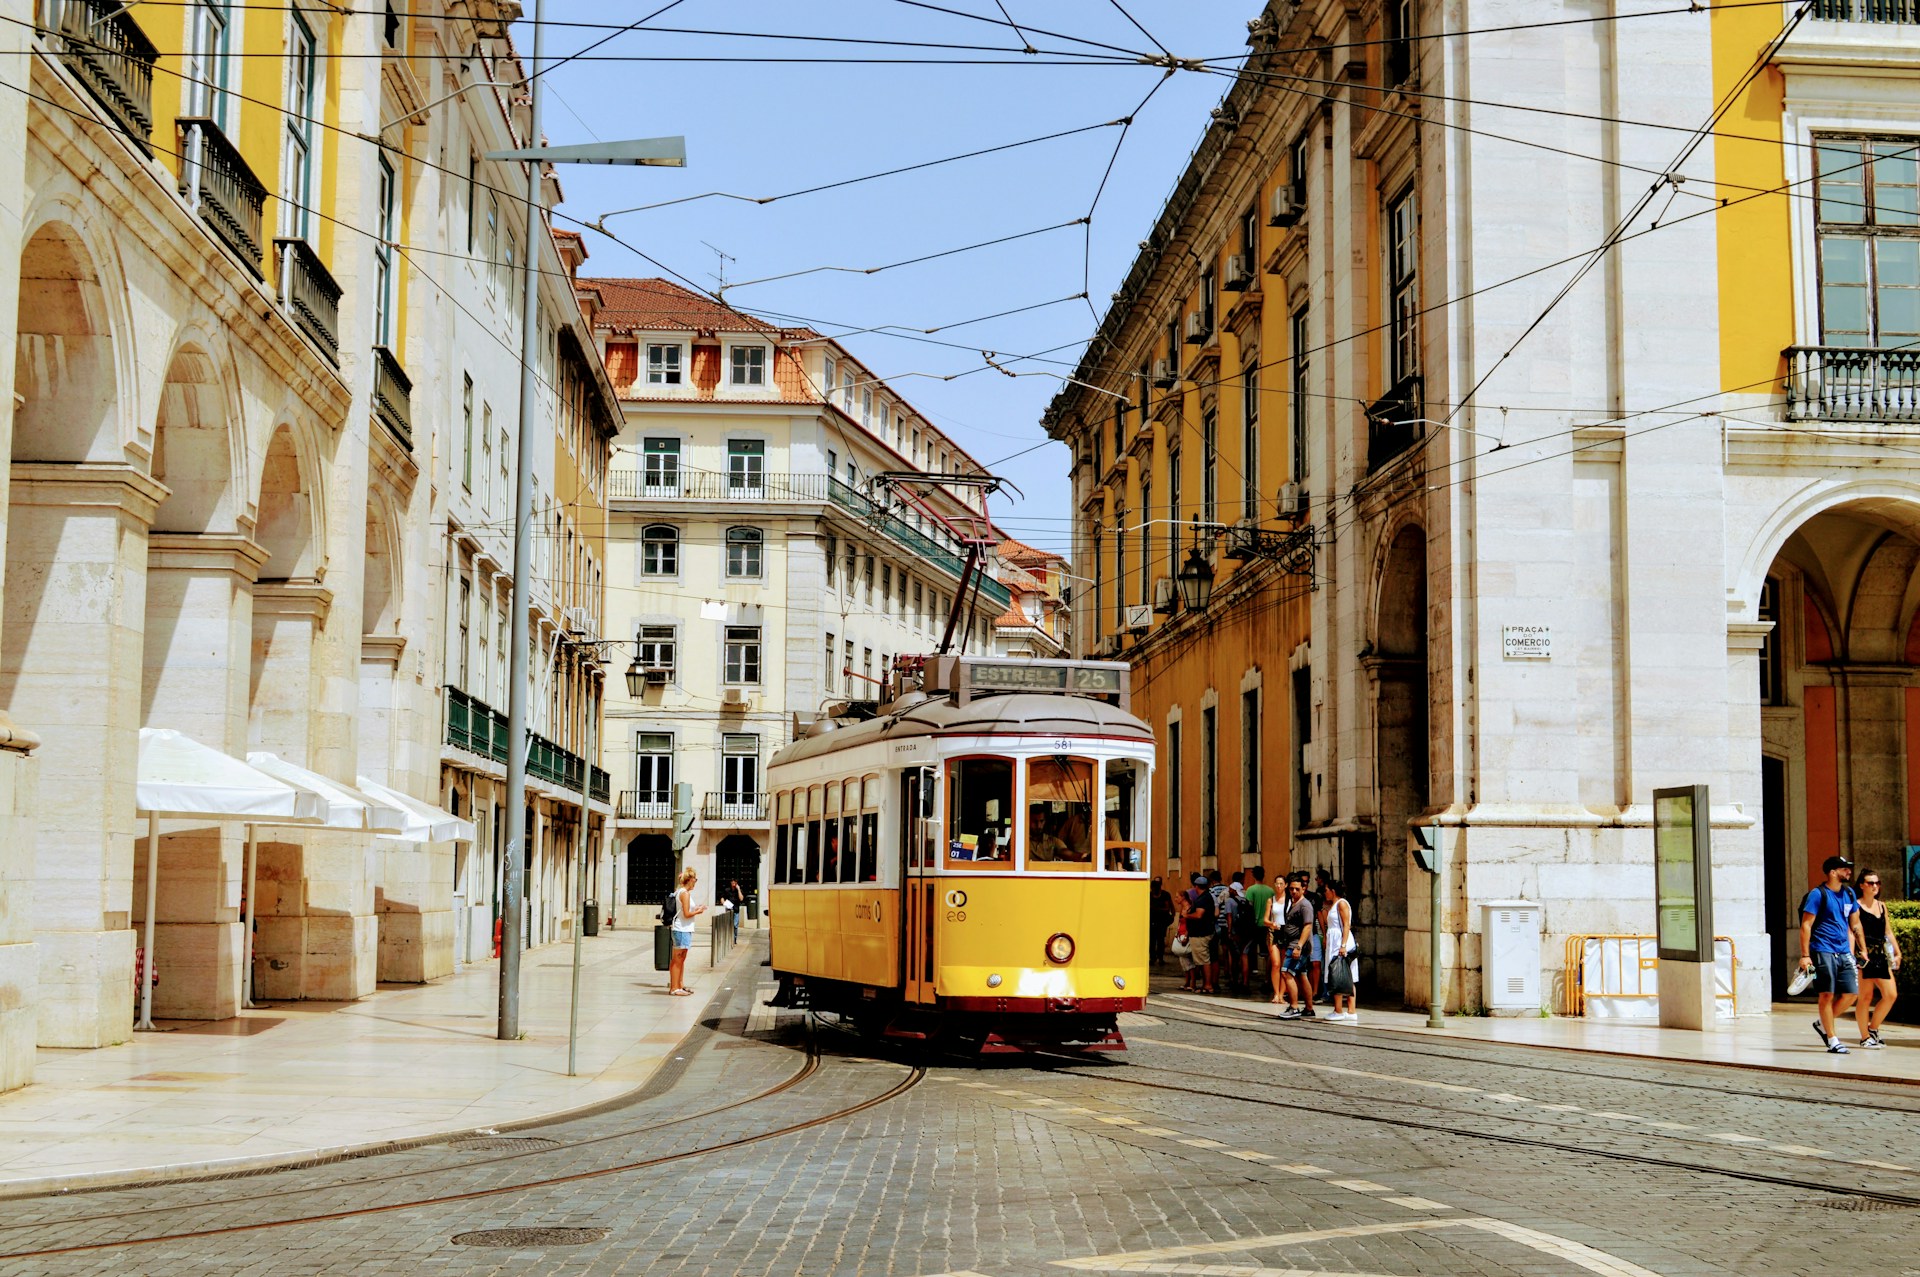 DIG-IN PRO: 5 Suggestions for Every Occasion – Lisbon